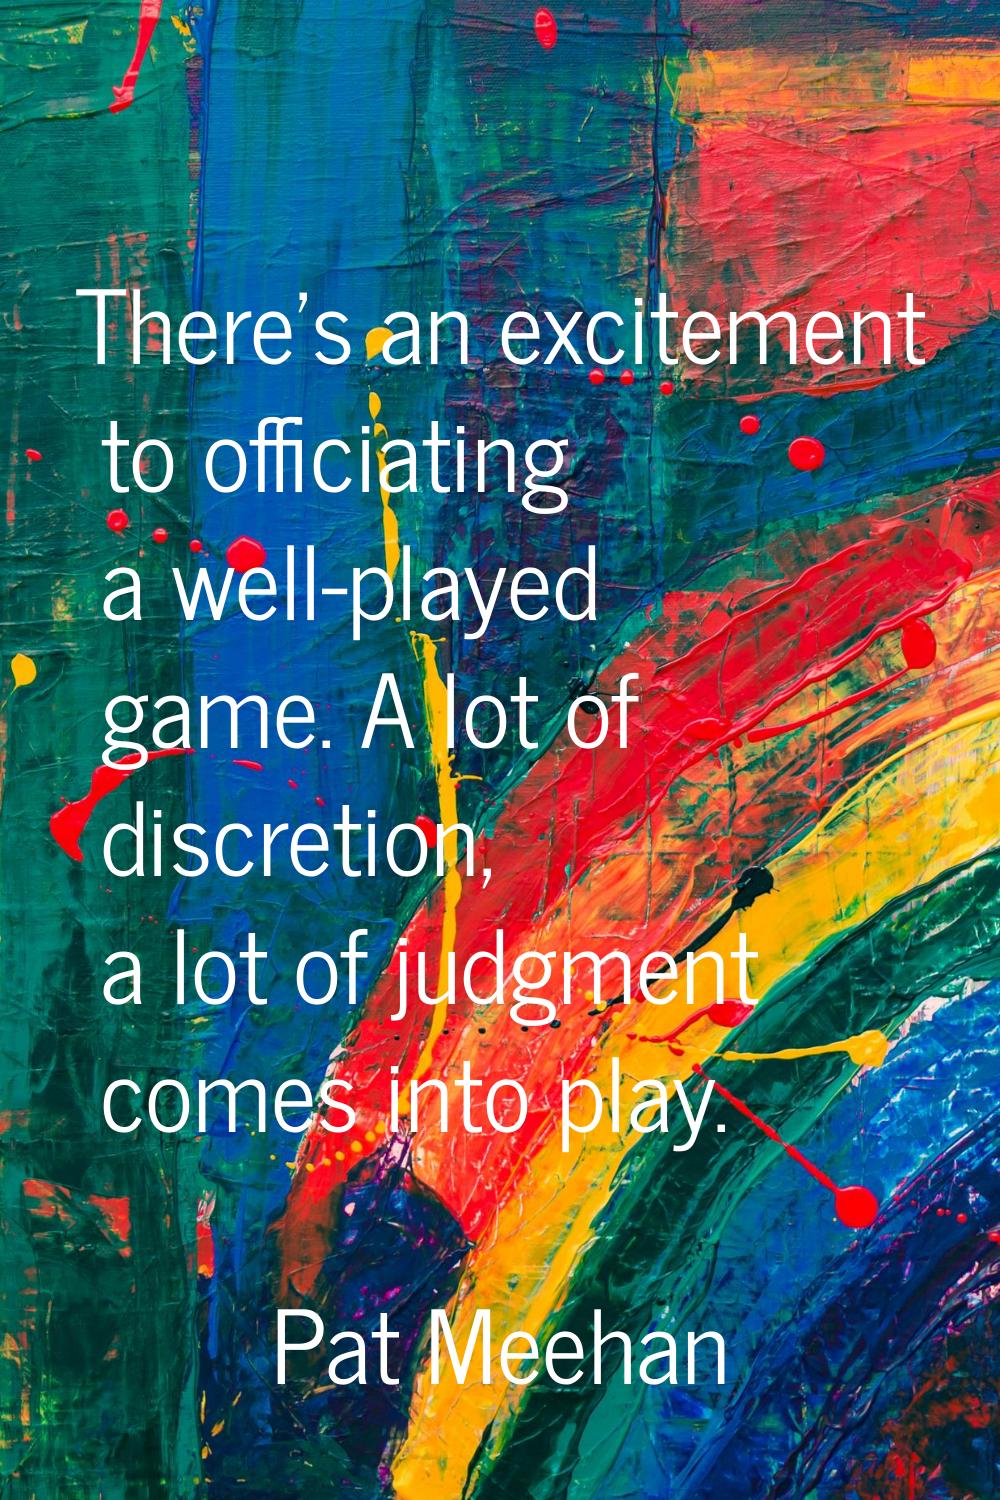 There's an excitement to officiating a well-played game. A lot of discretion, a lot of judgment com